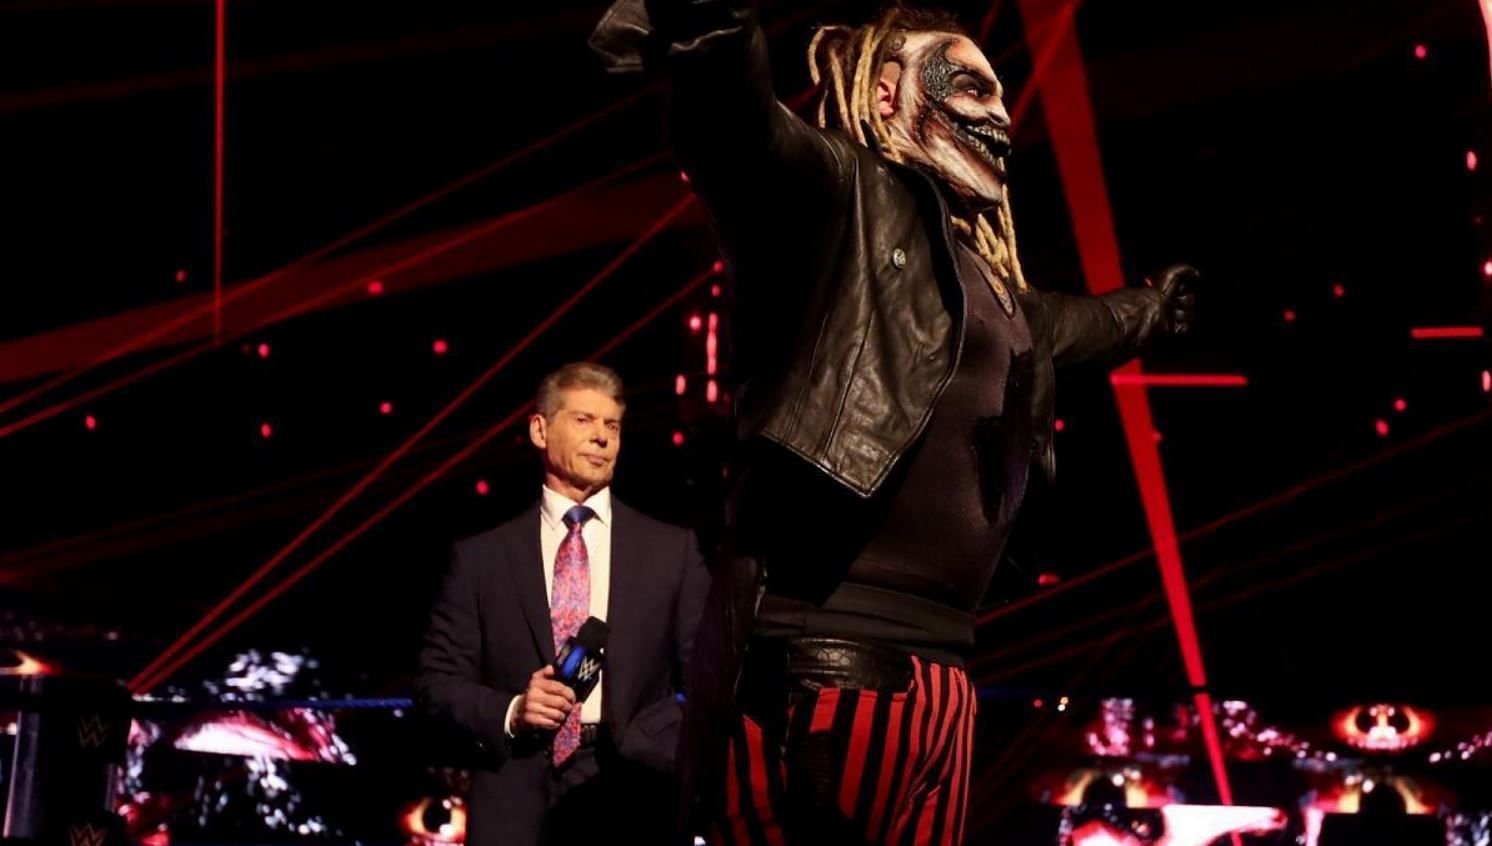 Bray Wyatt is rumored to have had a complicated relationship with Vince McMahon